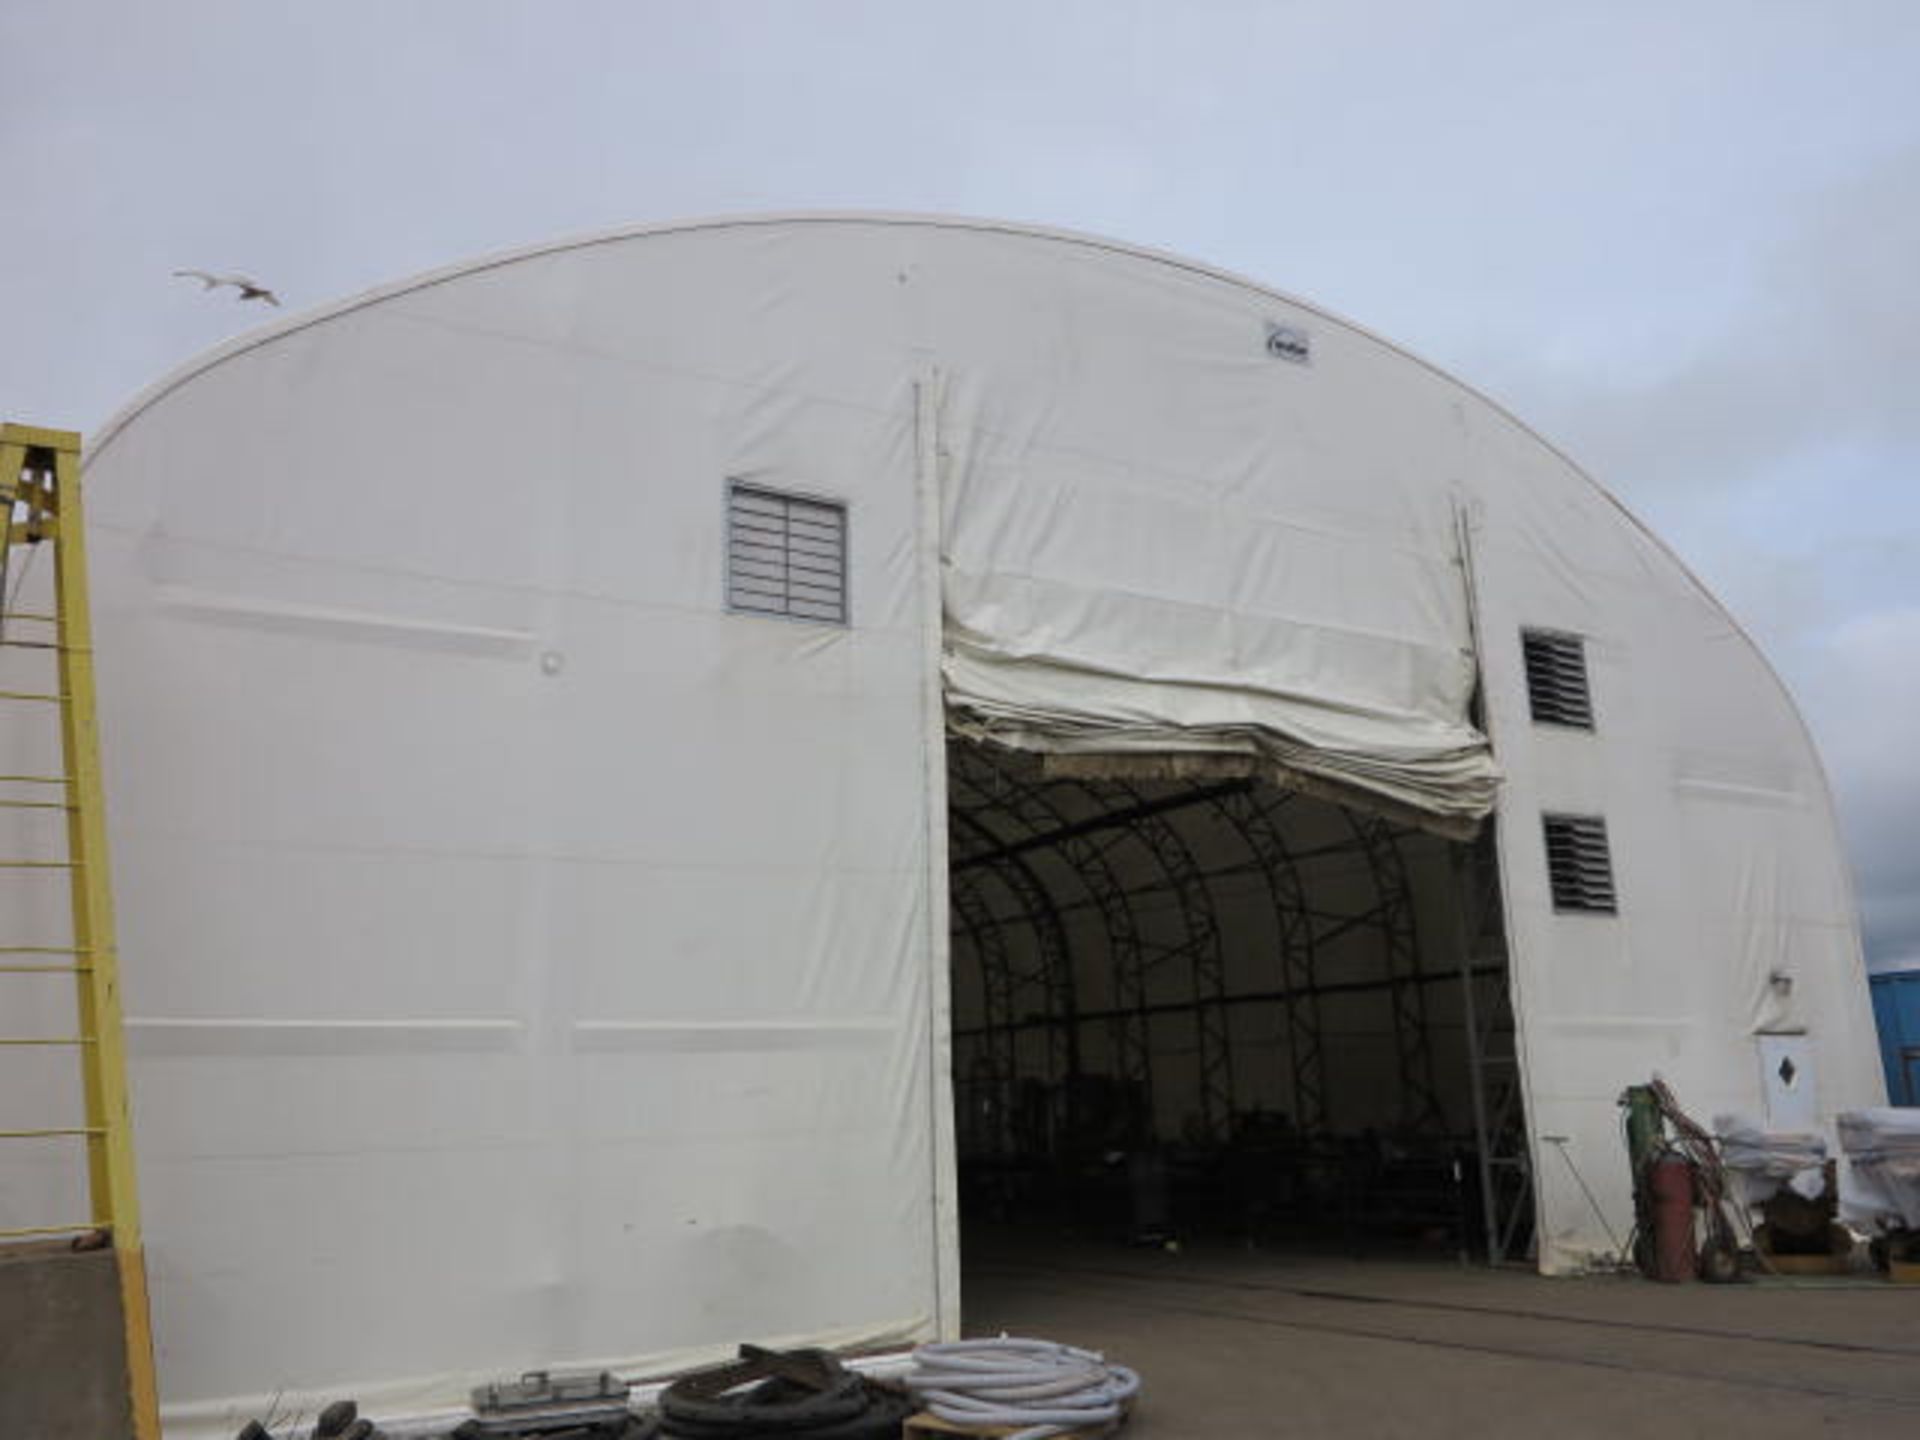 50' Quonset Hut with Prefabricated Structural Hardware, Fabric Covering, Nuts and Bolts, Vents, - Image 16 of 17